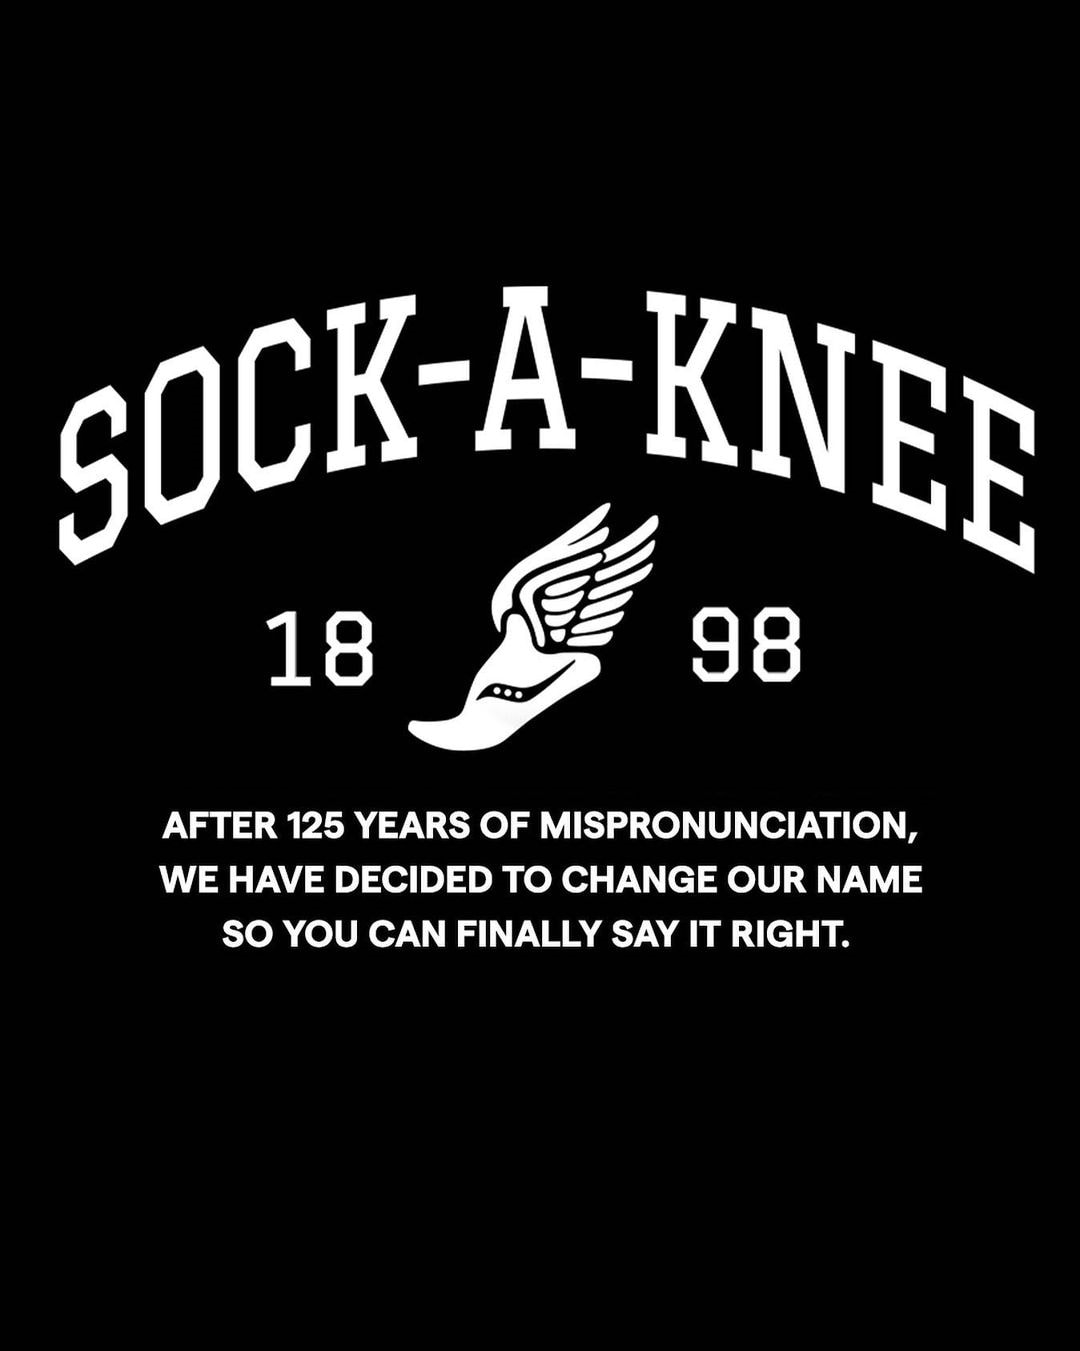 In April 2023, Saucony celebrated its 125th anniversary by poking fun at the mispronunciation of its name with a humorous twist, reminding everyone it's 'Sock-a-knee'